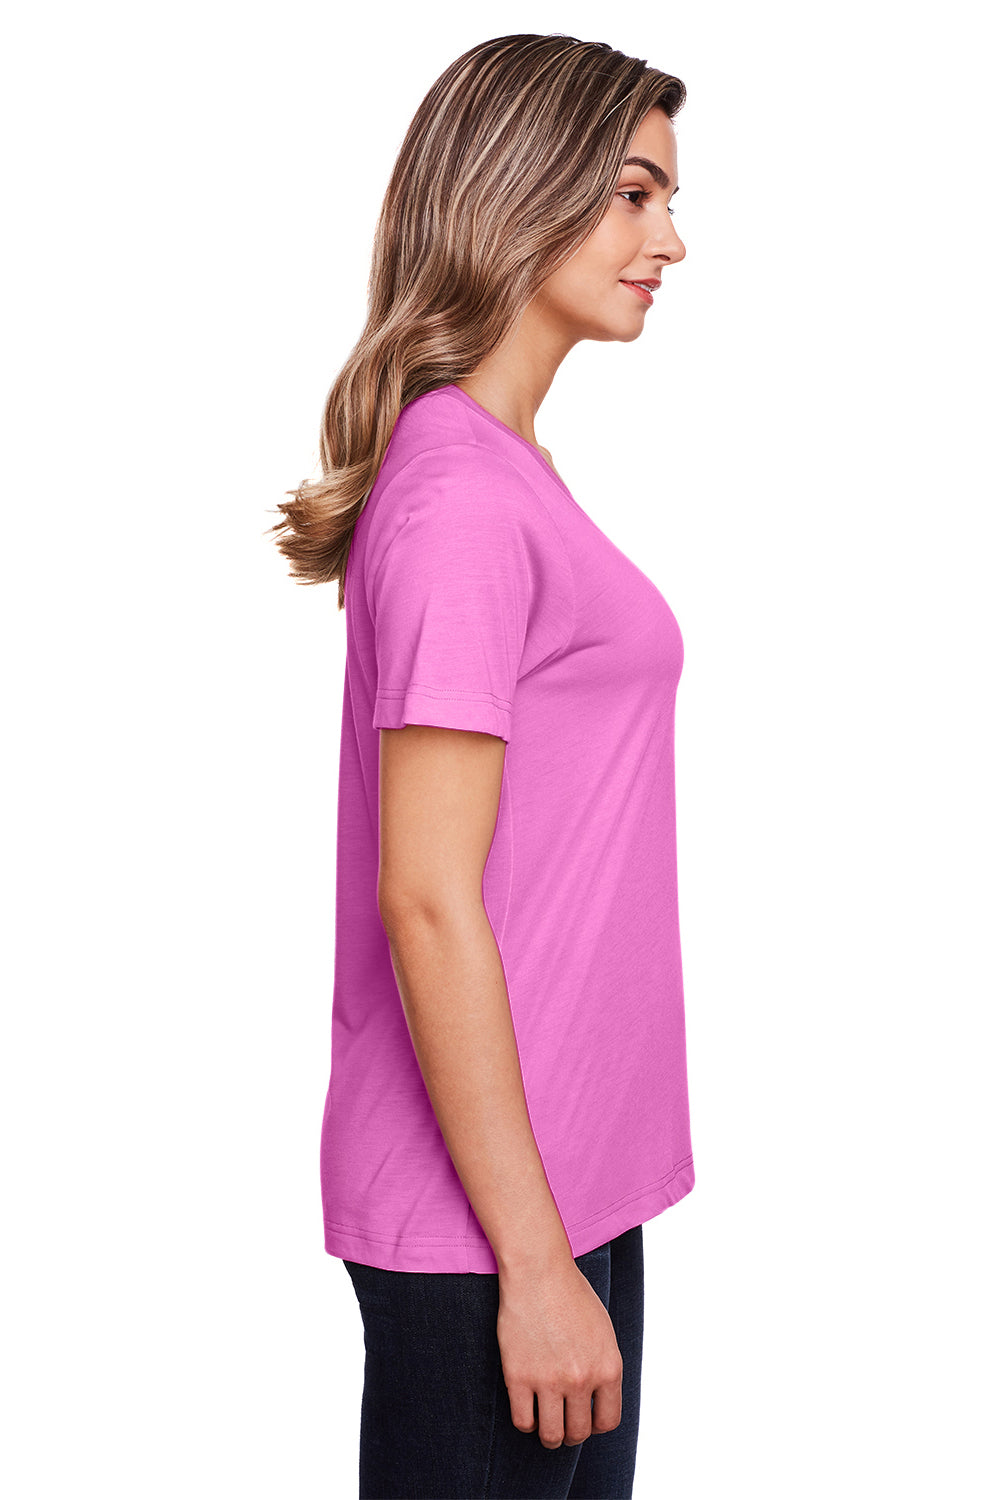 Core 365 CE111W Womens Fusion ChromaSoft Performance Moisture Wicking Short Sleeve Scoop Neck T-Shirt Charity Pink Side